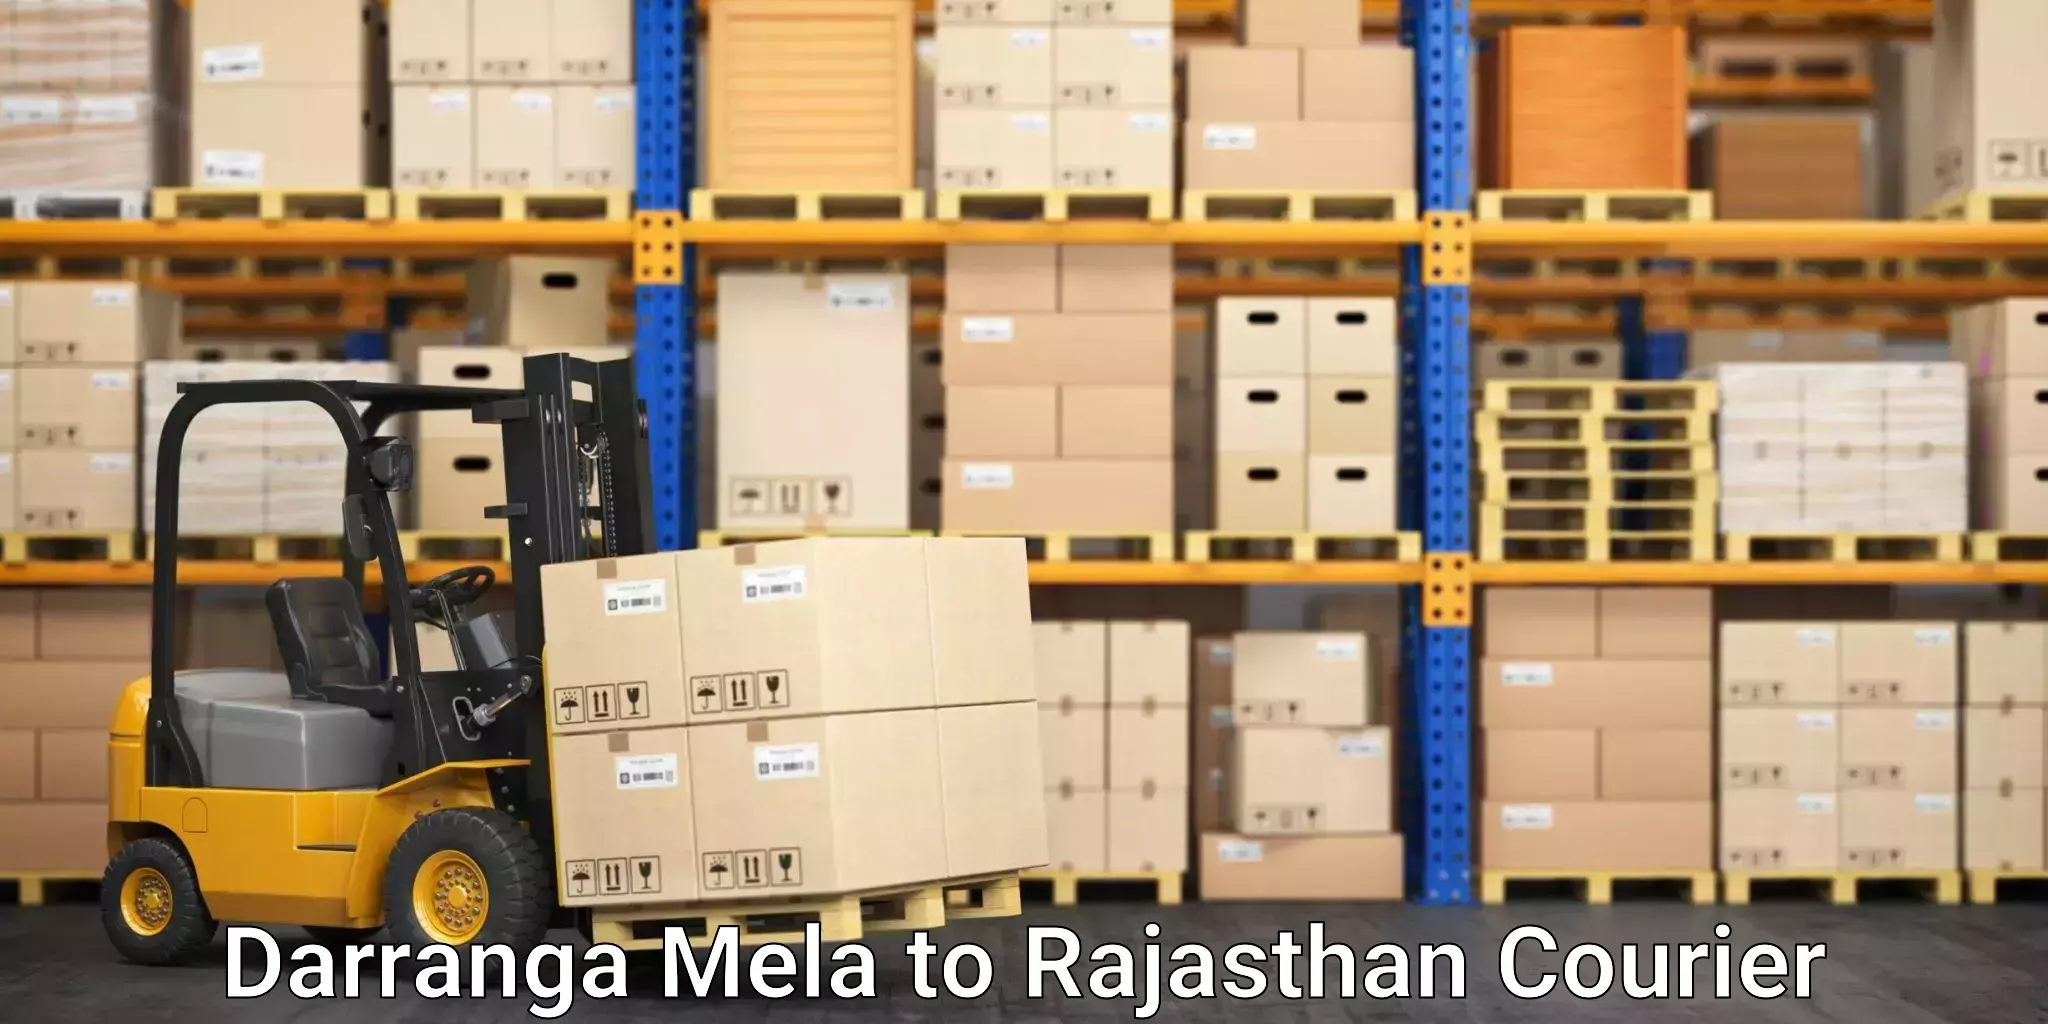 Integrated courier services Darranga Mela to Rajasthan